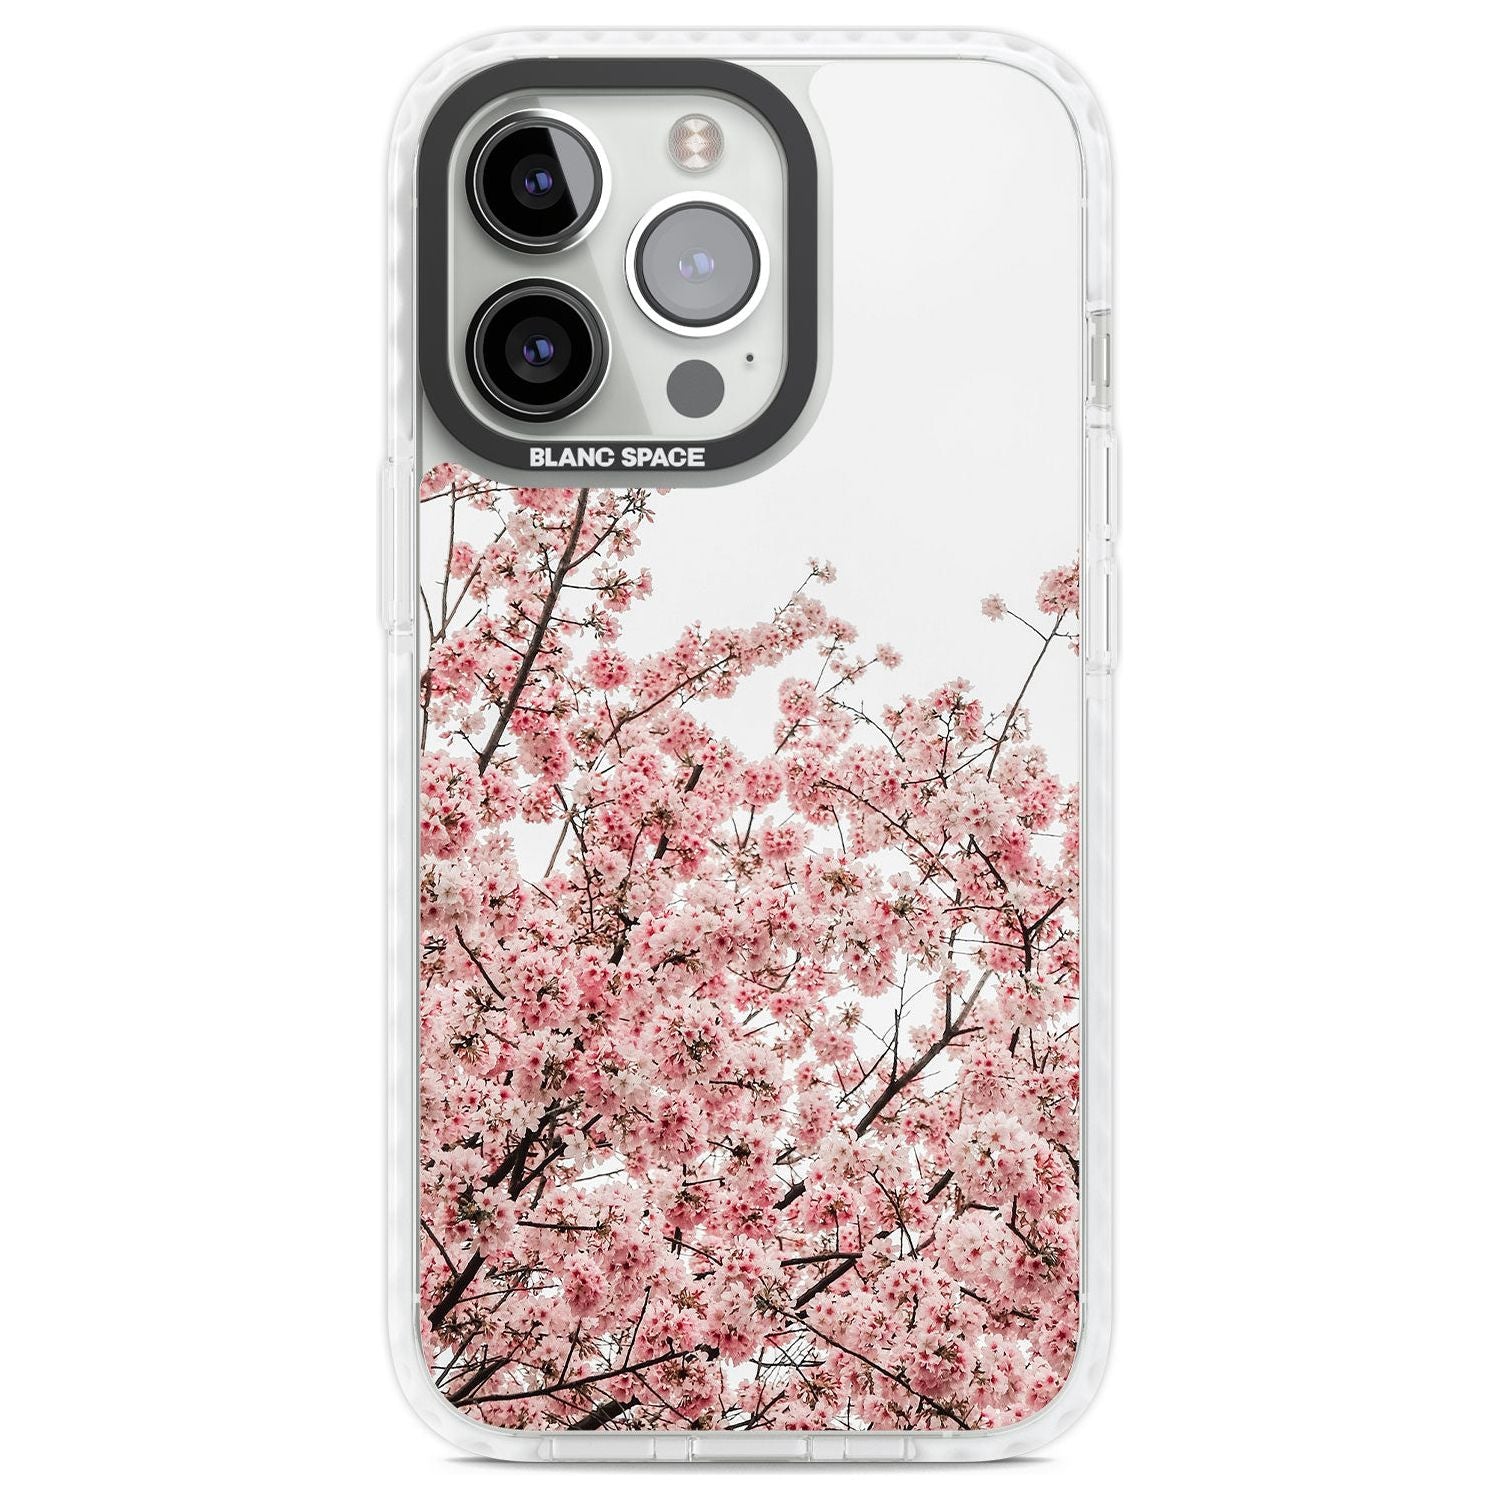 Cherry Blossoms - Real Floral Photographs Phone Case iPhone 13 Pro / Impact Case,iPhone 14 Pro / Impact Case,iPhone 15 Pro Max / Impact Case,iPhone 15 Pro / Impact Case Blanc Space